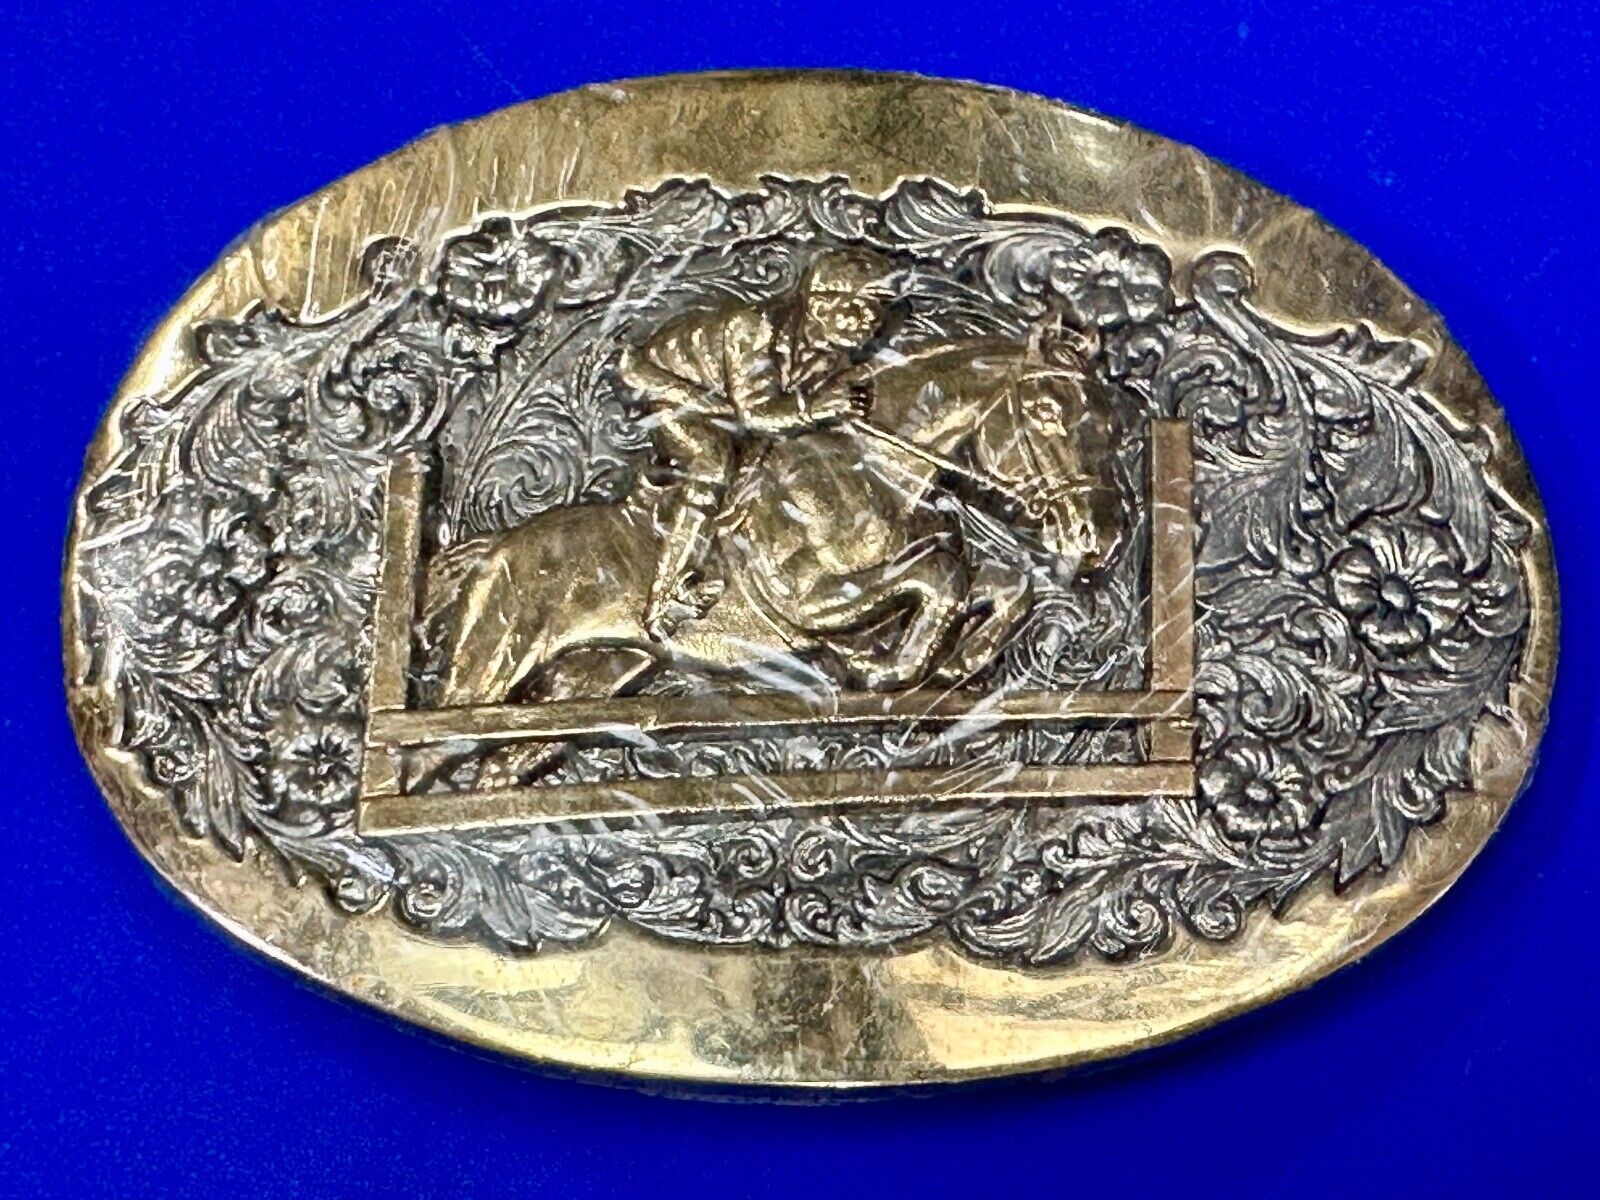 NOS 24k gold plated western cowboy jumping over fence ADM belt buckle in wrap